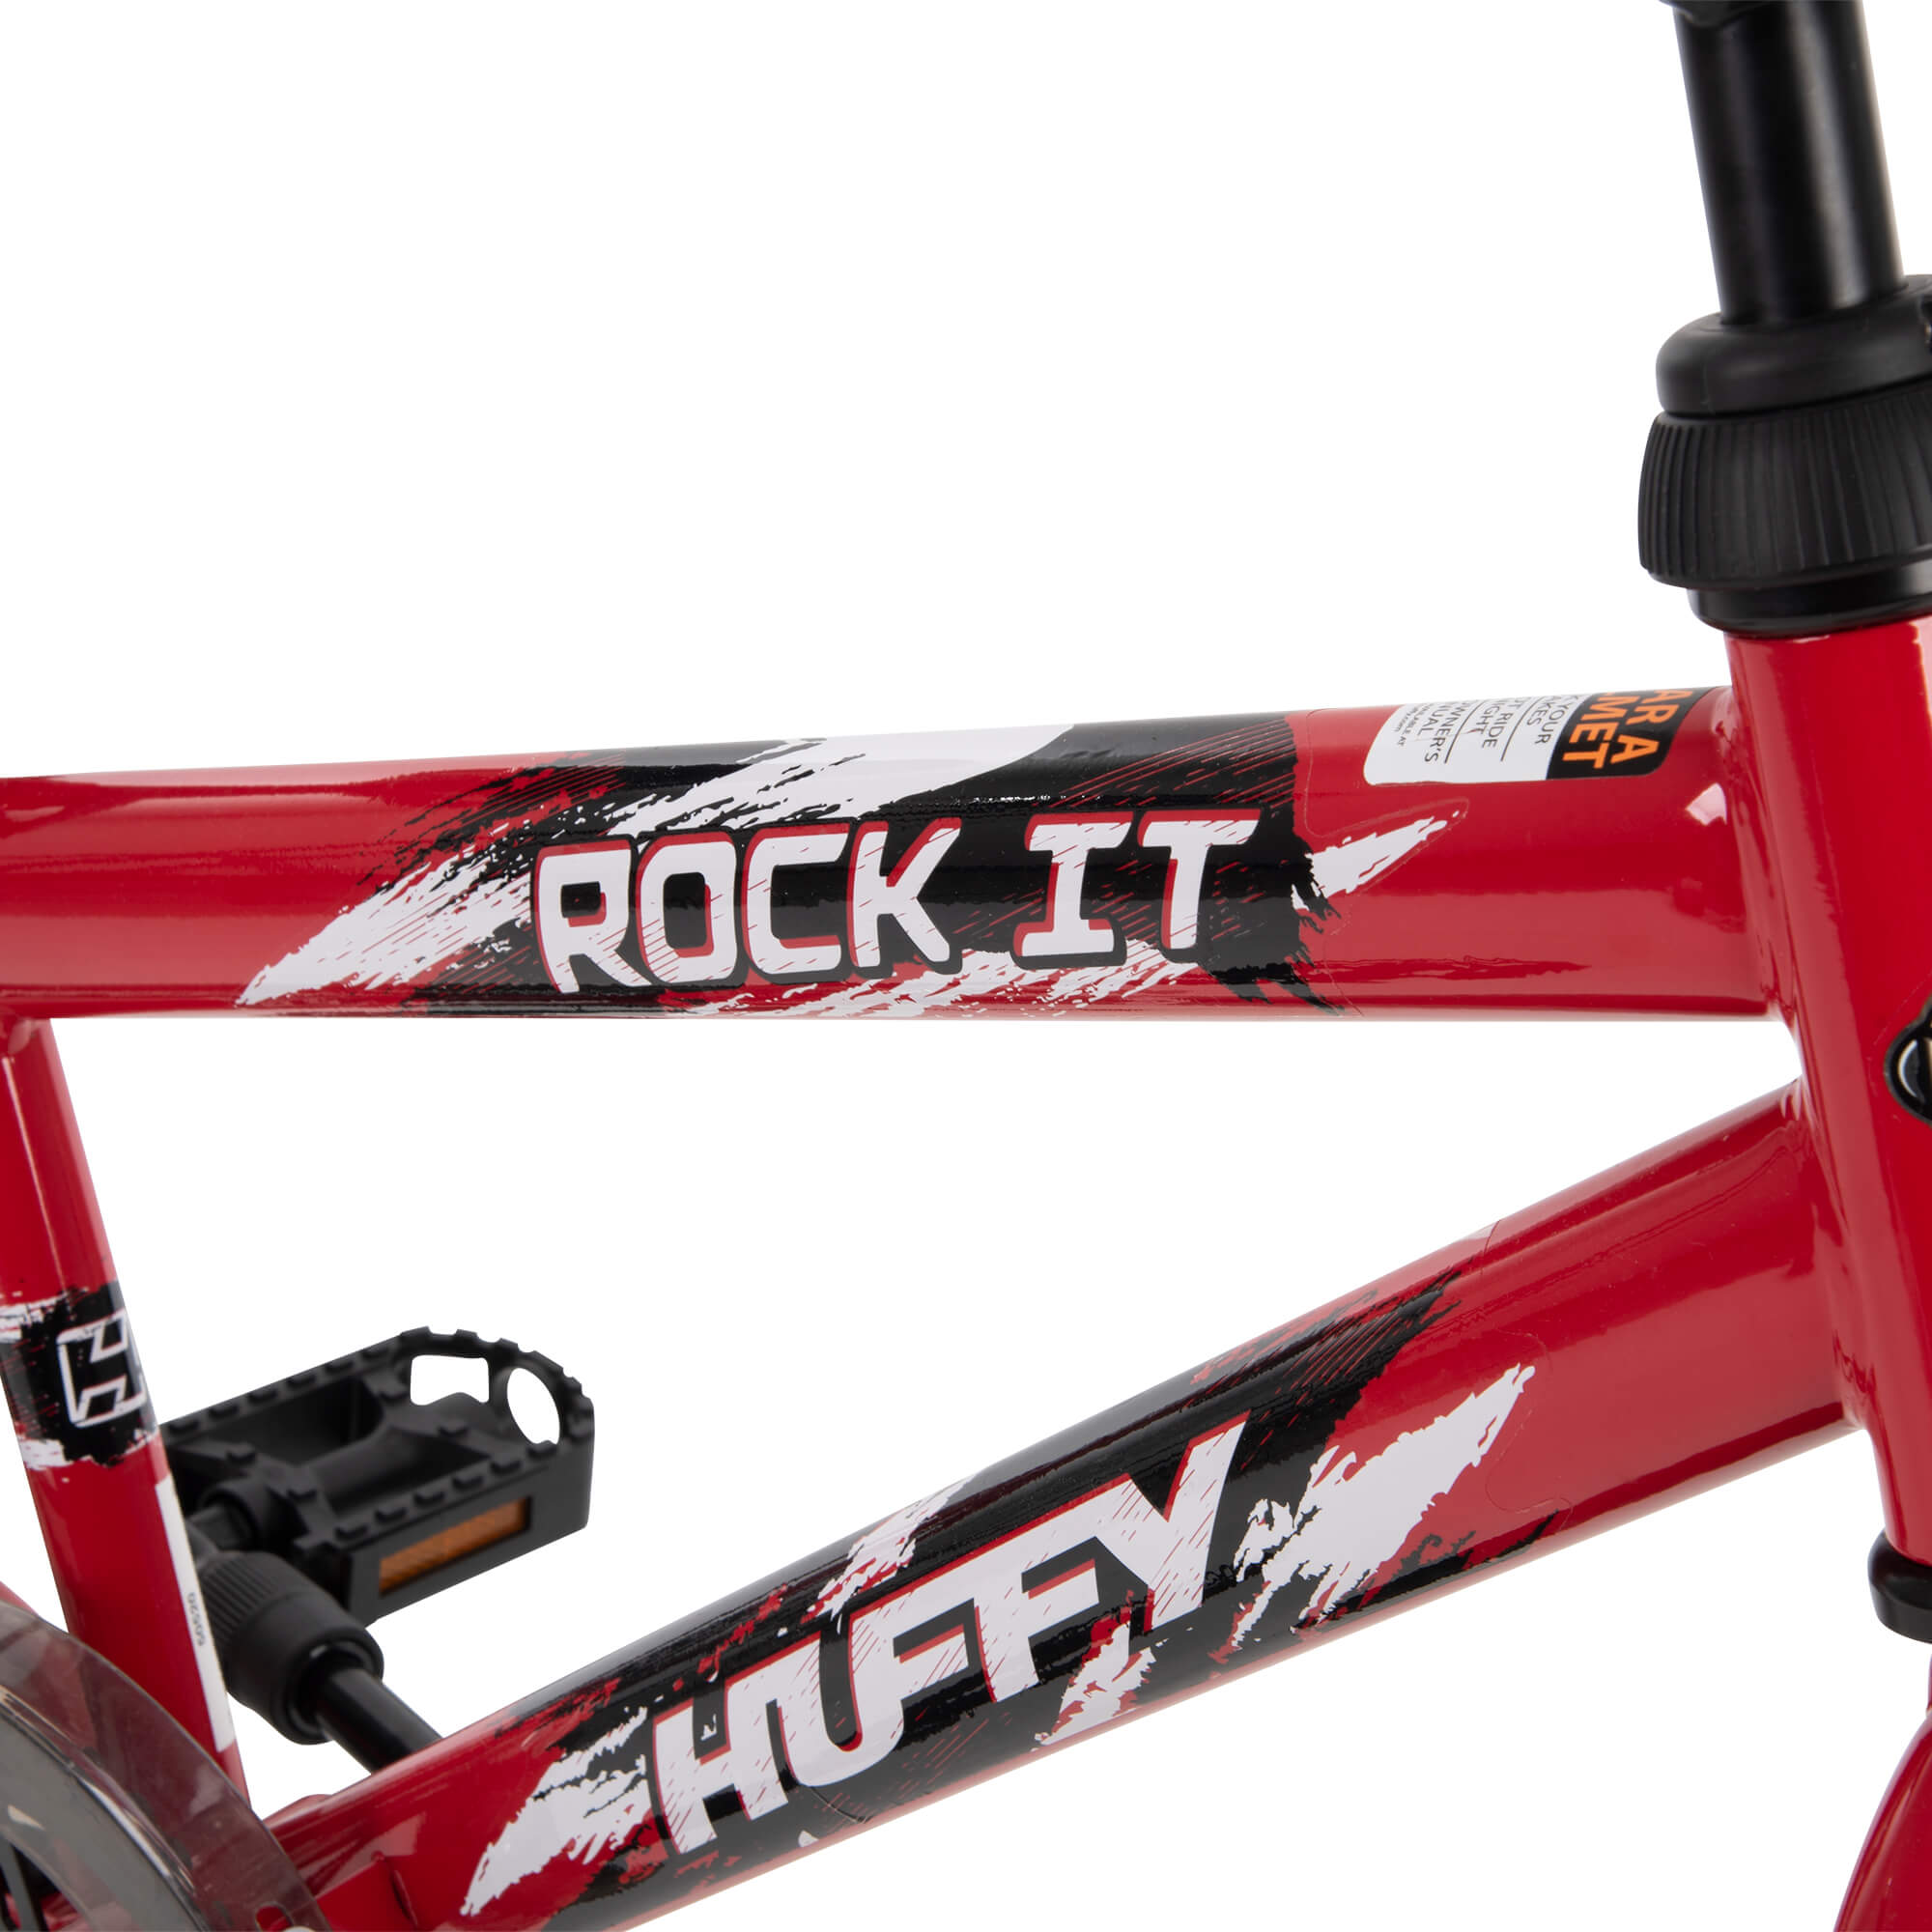 Huffy 20" Rock It Kids Bike for Boys, Hot Red - image 4 of 8